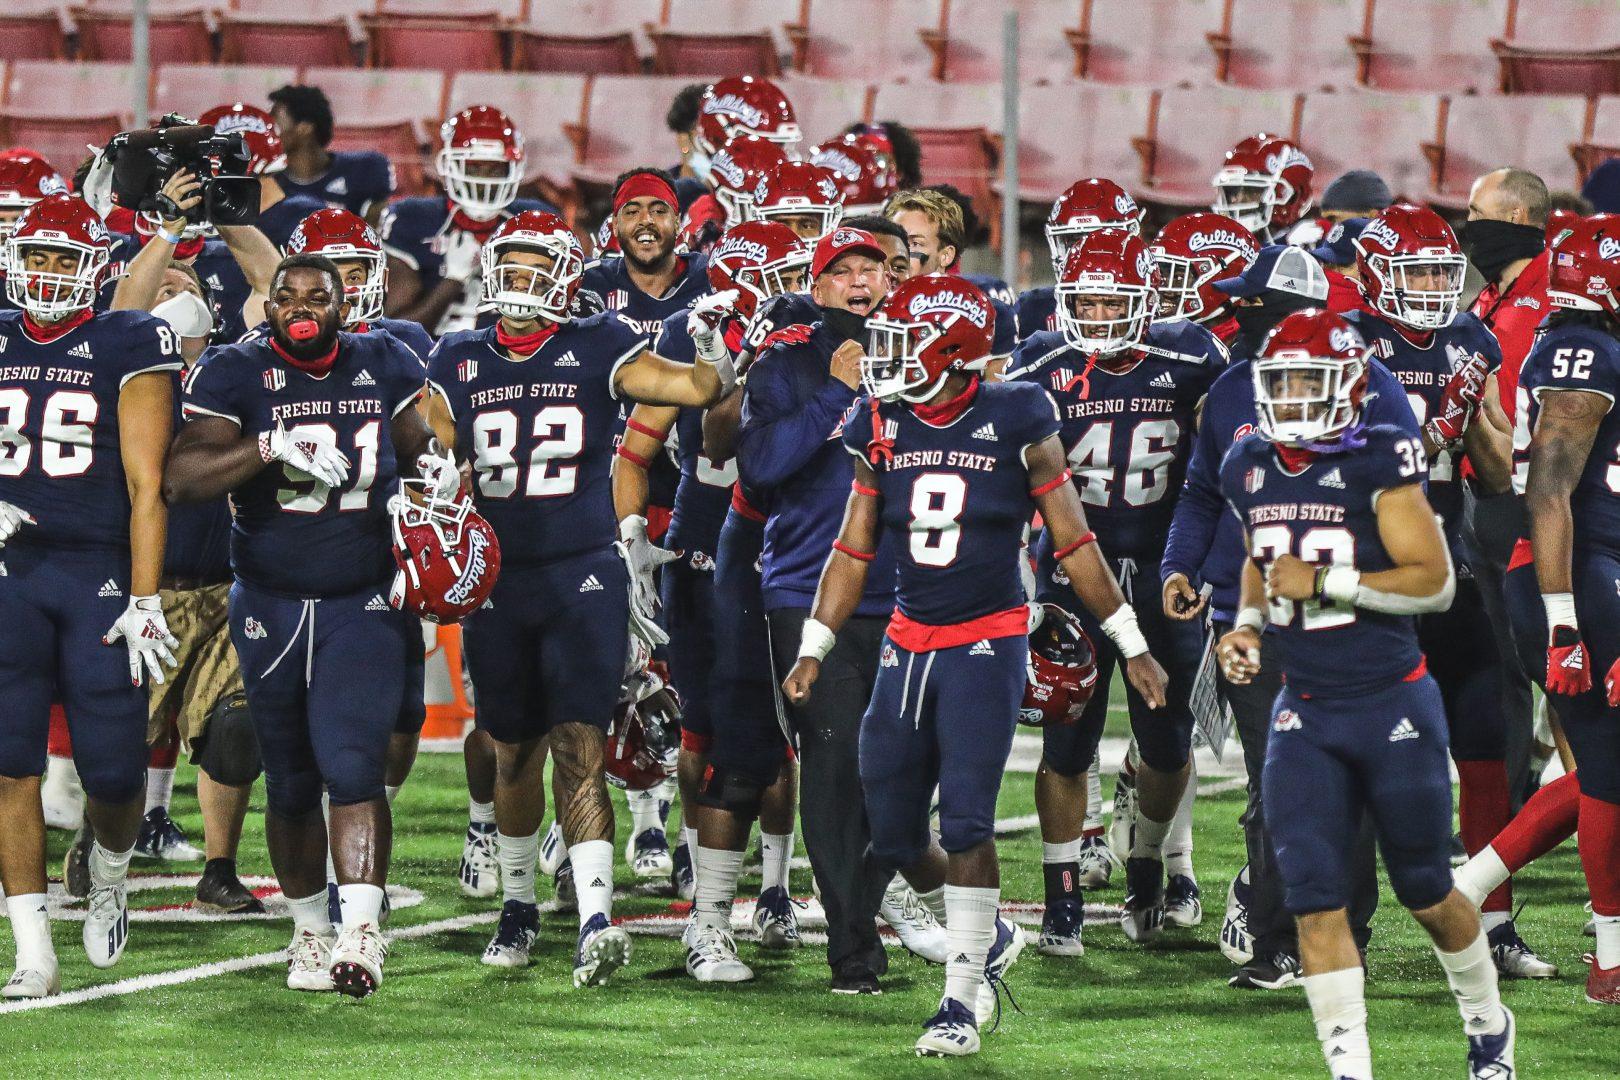 Fresno State’s head coach Kalen Deboer celebrates with the team after winning the football game against Colorado State Rams on October 29, 2020, at Bulldog Stadium. (Vendila Yang/ The Collegian)